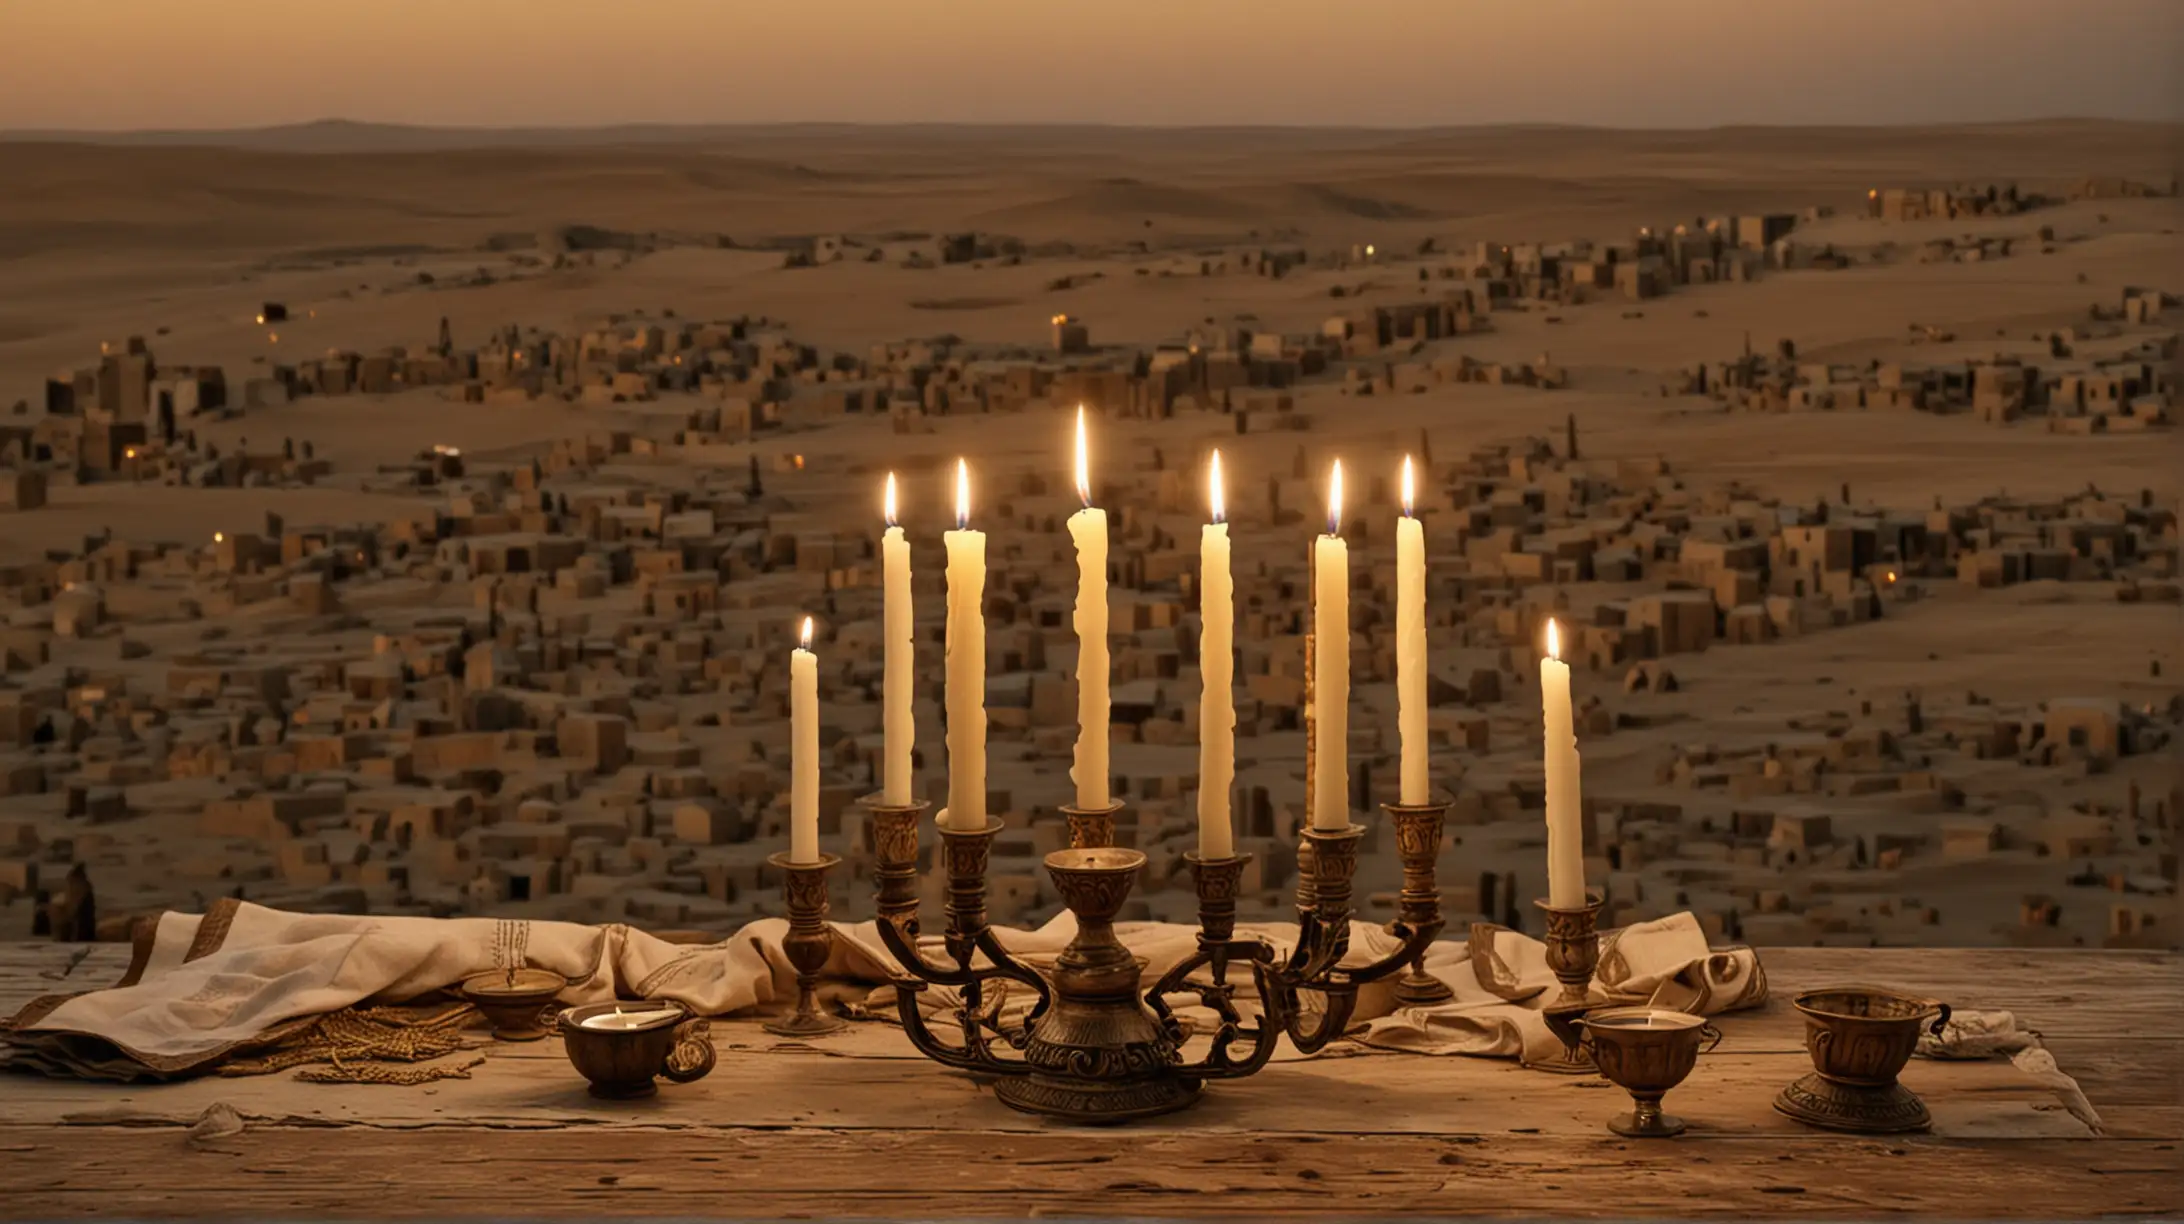 The 7 candle menora, sitting on a decorative wooden table,  with the 7 candles lit. The setting should be a desert location, with a tent and some people in the background. The sky should be magnicient. Set during the era of the Biblical Moses.